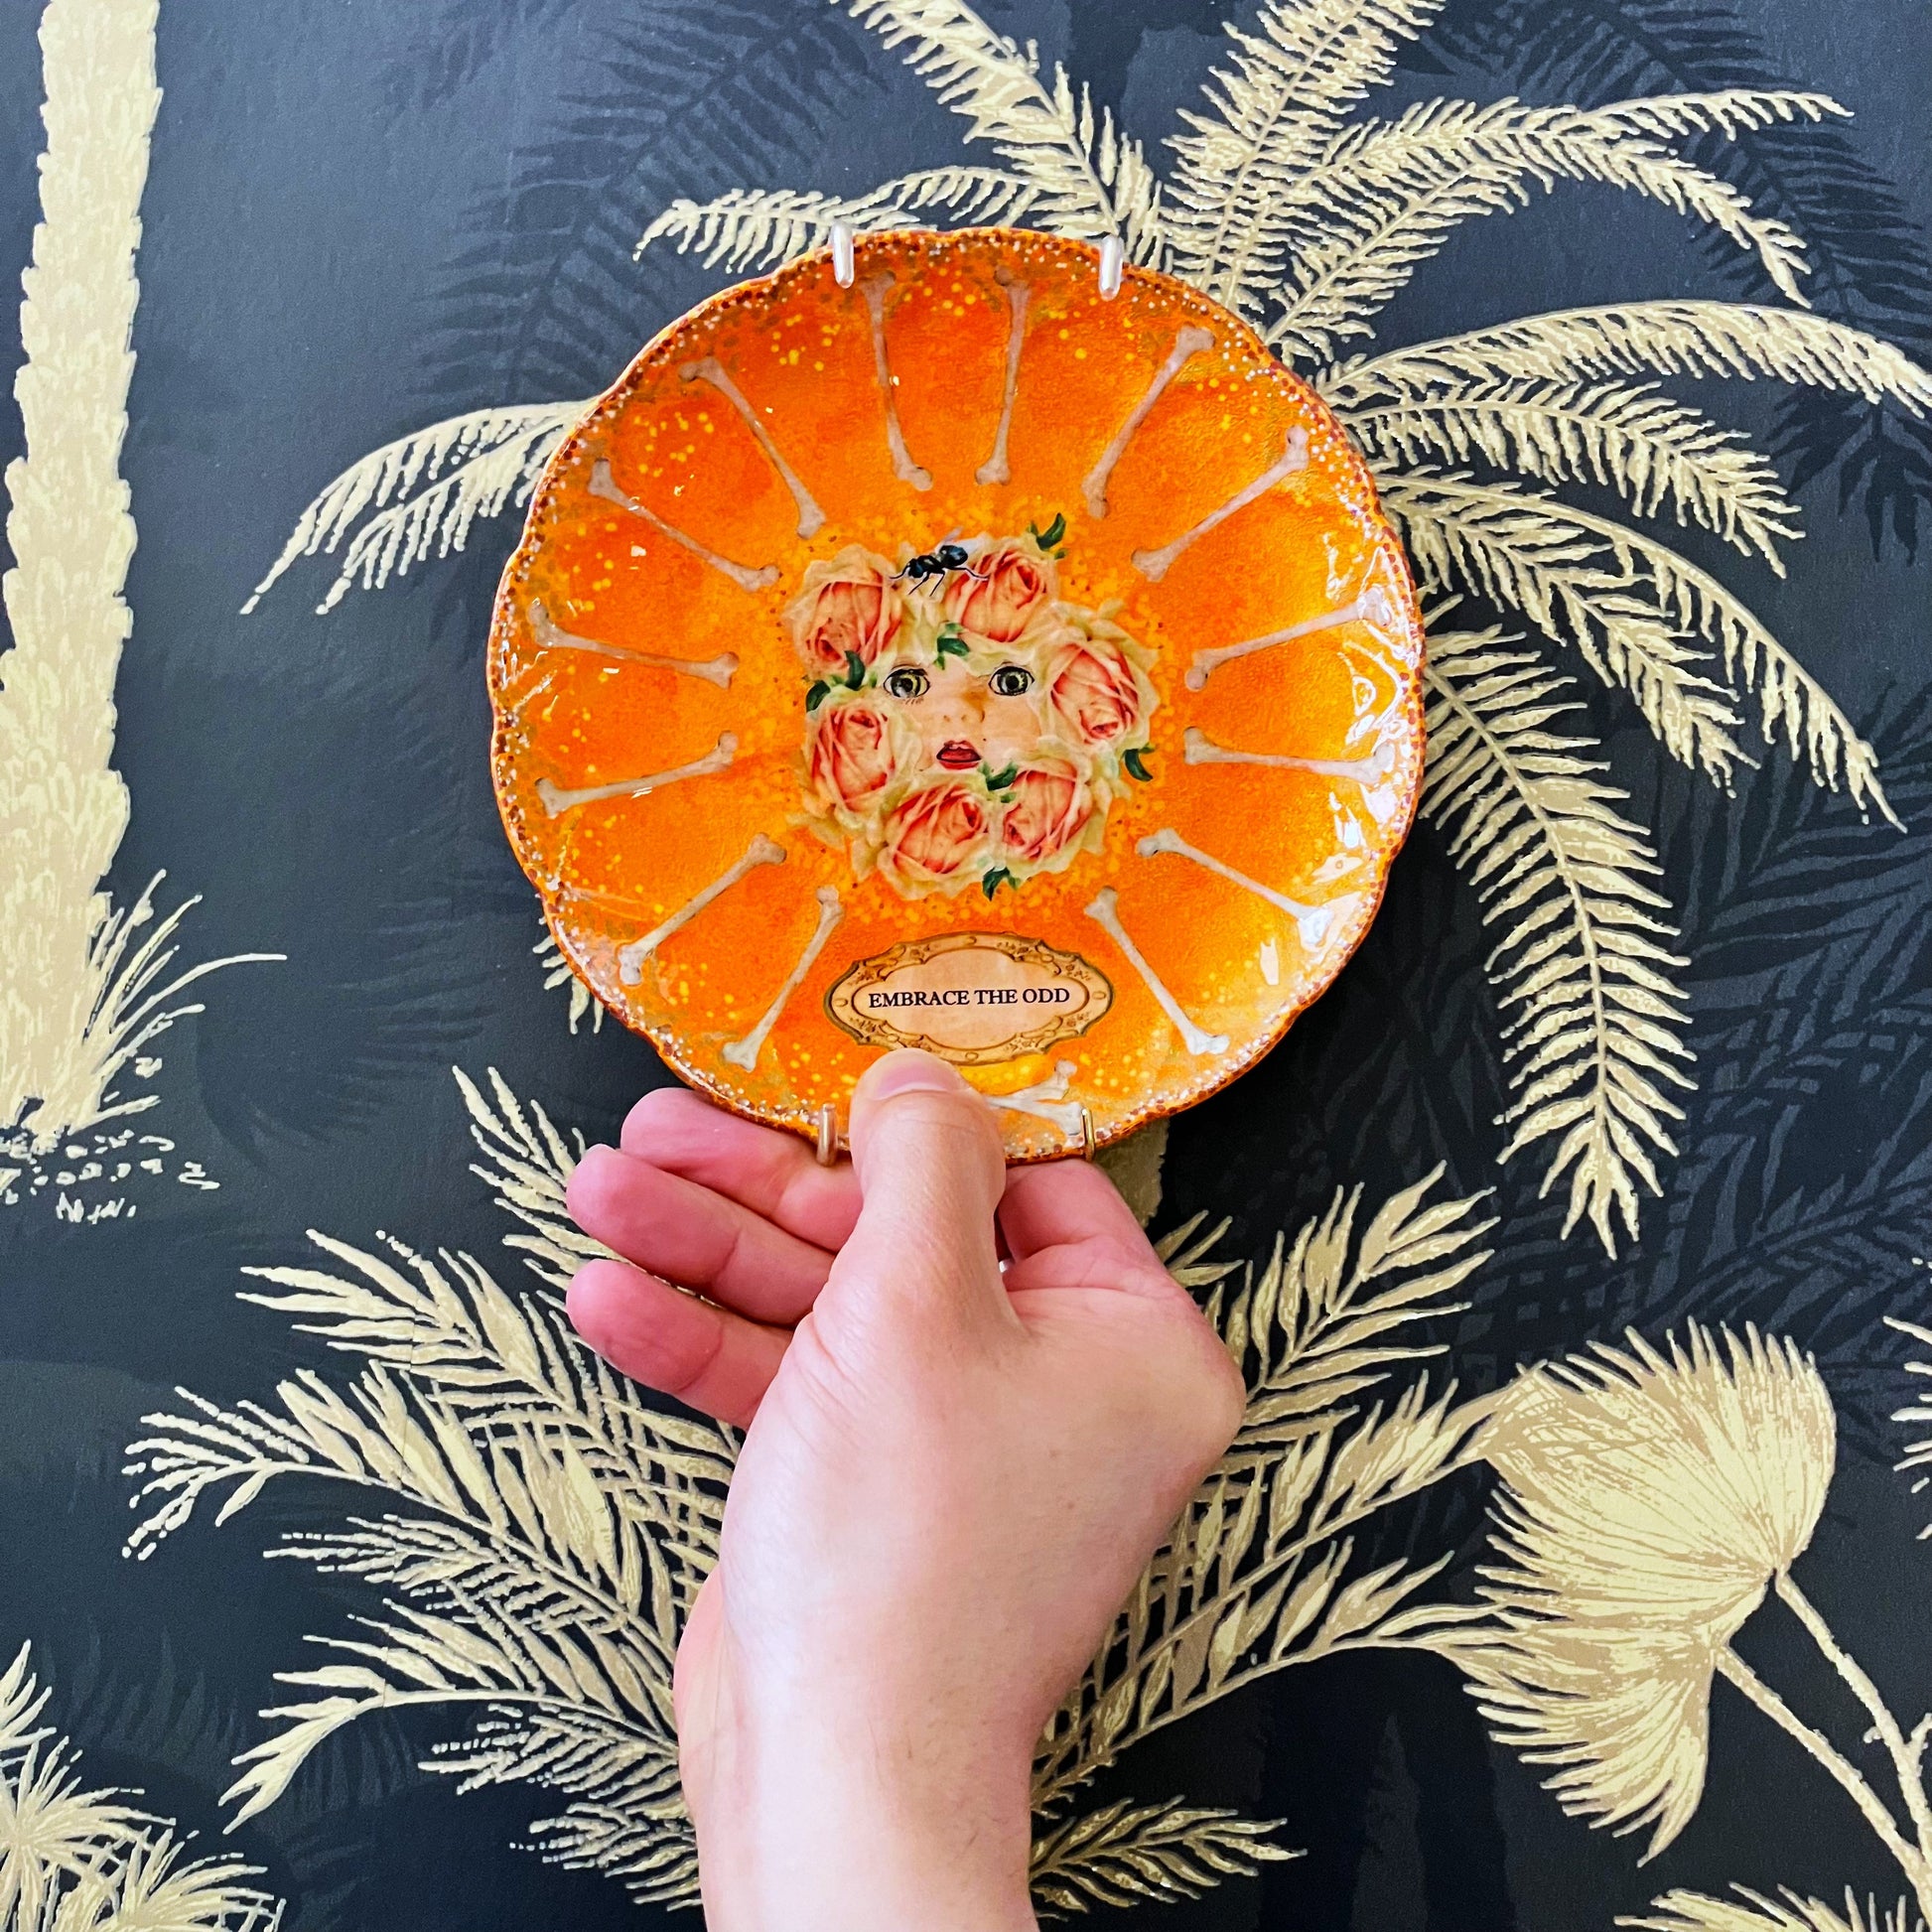 "Embrace the Odd" Orange Wall Plate by House of Frisson, featuring a one-of-a-kind paper collage of a doll's face surrounded by roses, a fly, bones, and a message box reading "Embrace the Odd". Showing someone holding the plate.